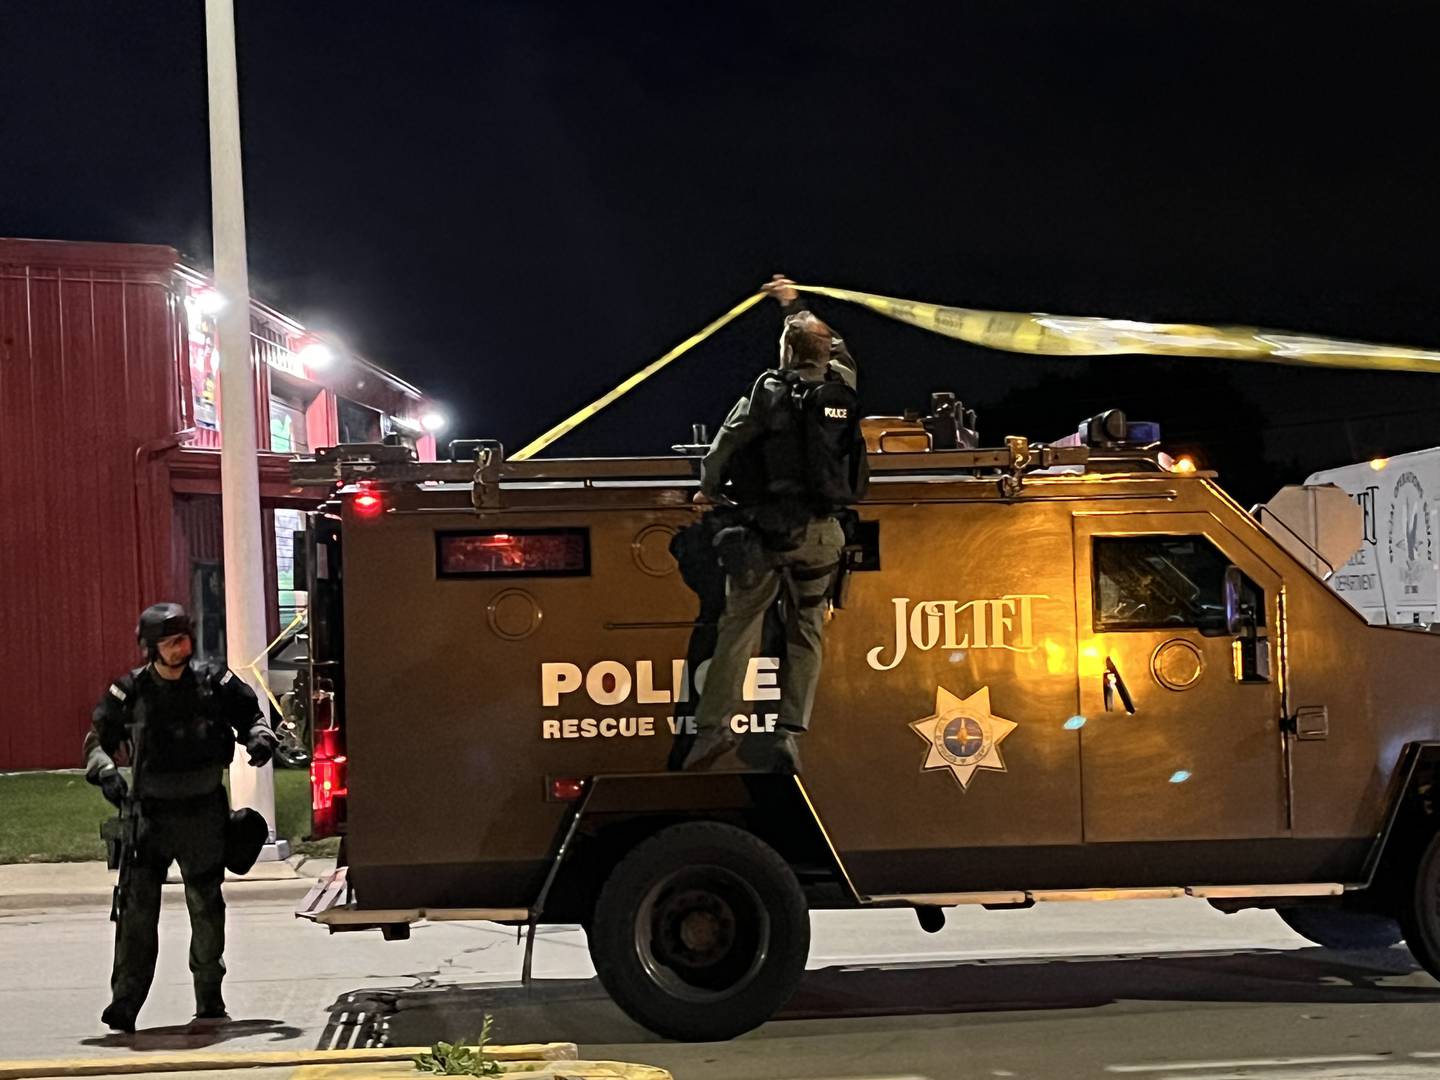 A Joliet police rescue vehicle moves into the scene of an incident at the 200 block of Center Street in Joliet at 10:48 p.m. on Thursday, Oct. 6, 2022.